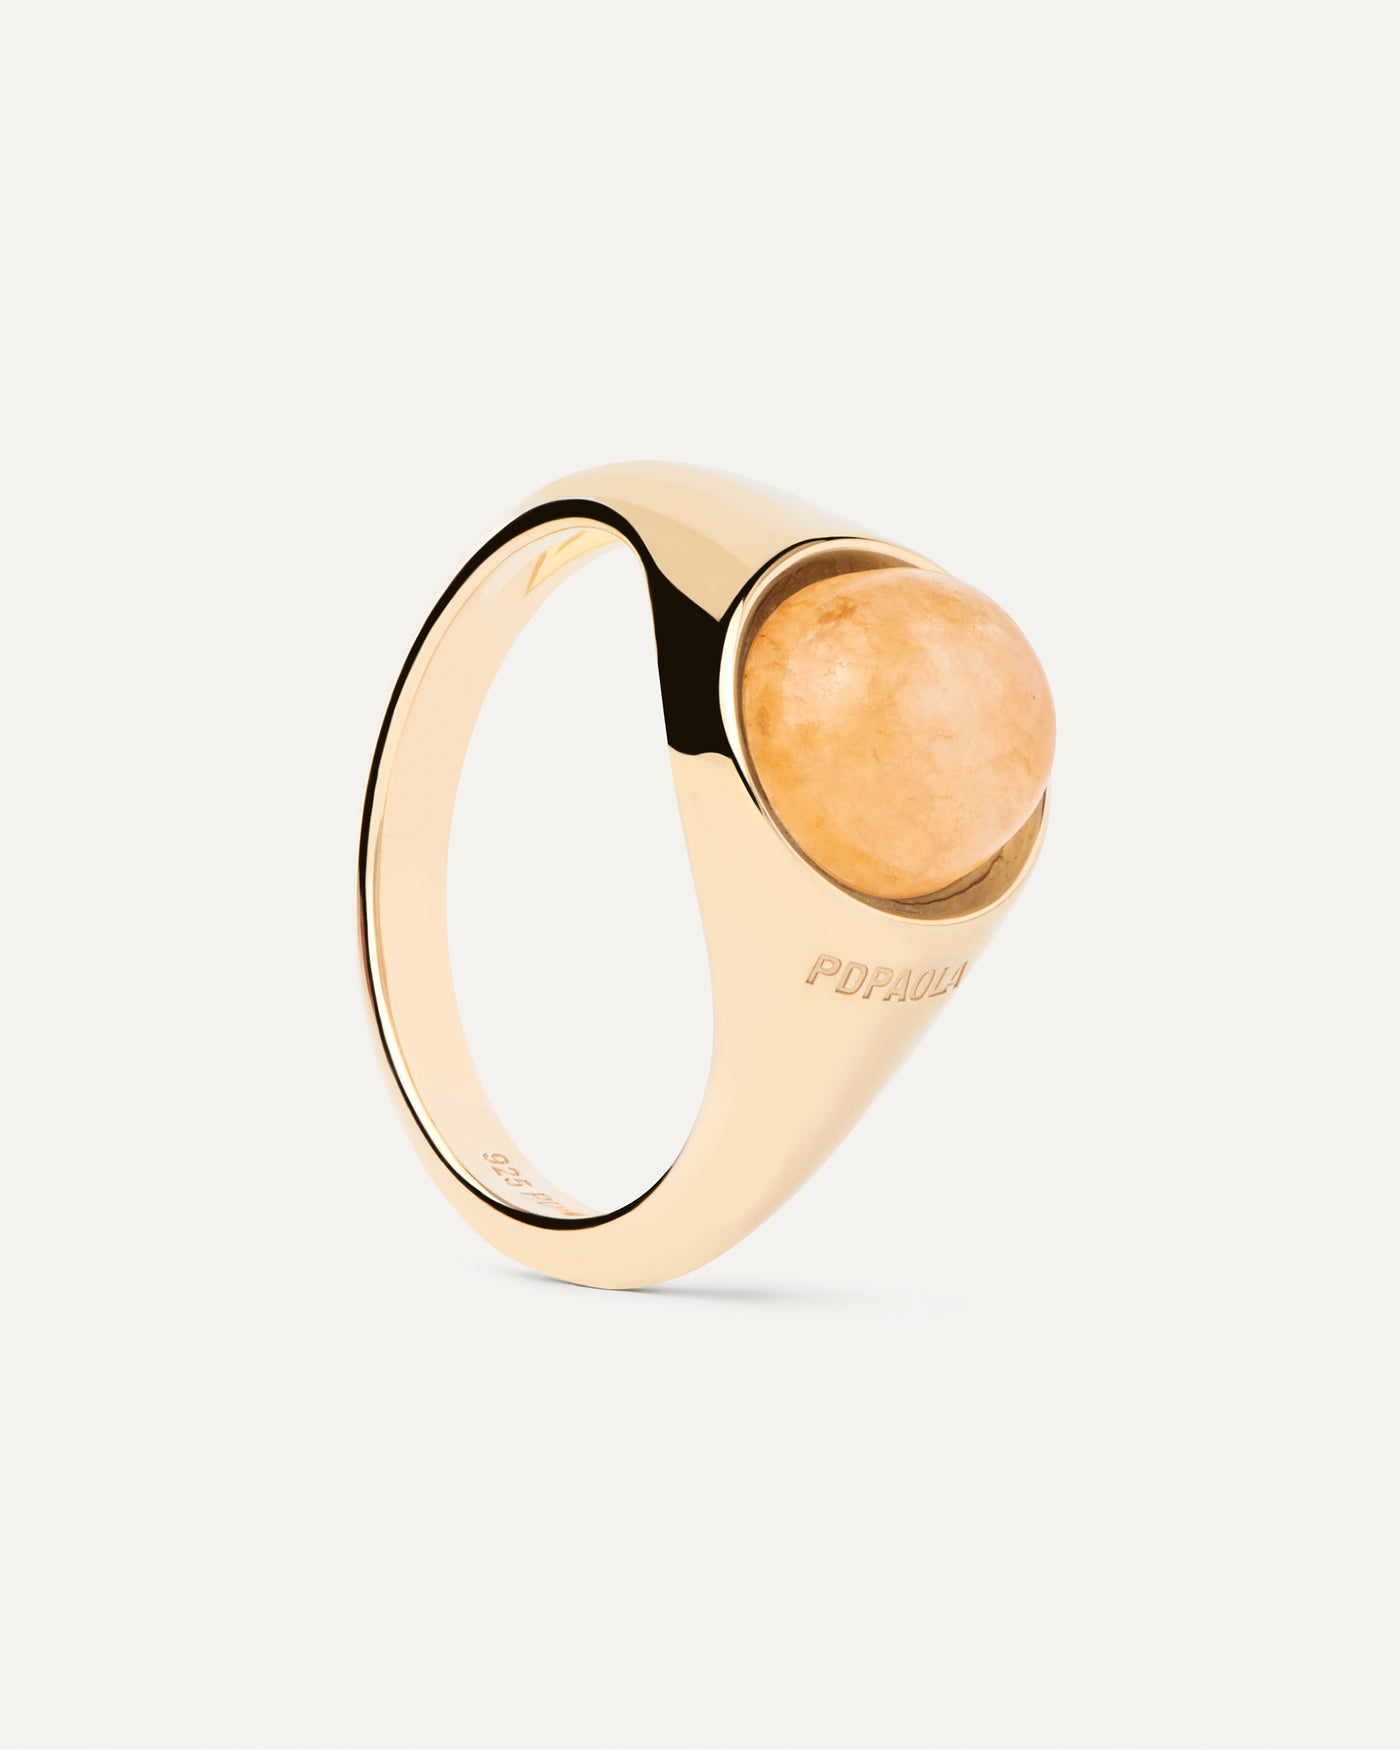 2023 Selection | Yellow Aventurine Moon Ring. Get the latest arrival from PDPAOLA. Place your order safely and get this Best Seller. Free Shipping.